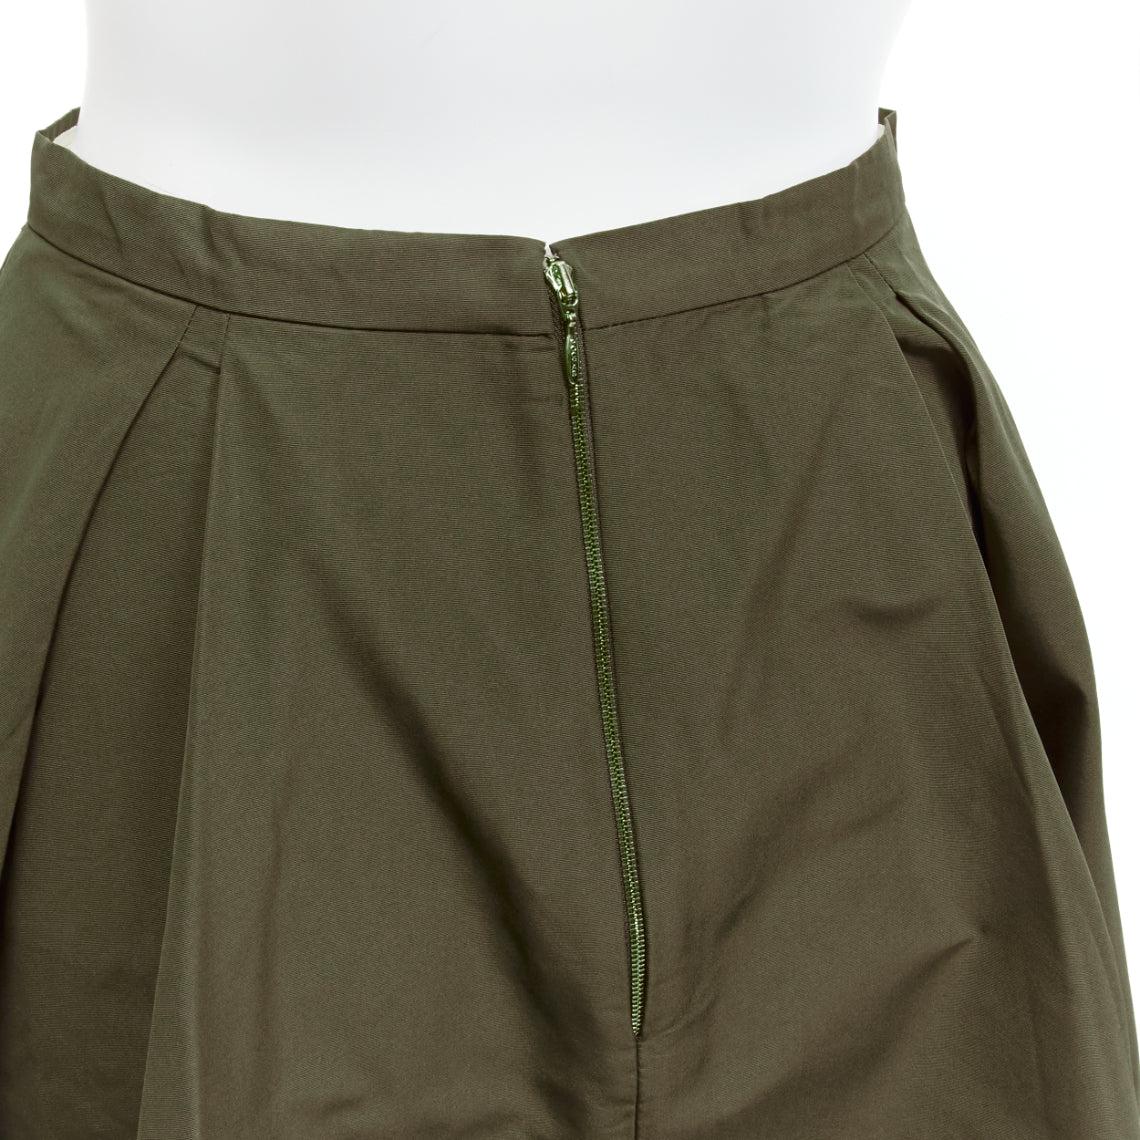 ROCHAS dark green bias cut nylon A-line safari midi skirt IT38 XS
Reference: SNKO/A00323
Brand: Rochas
Material: Polyester
Color: Green
Pattern: Solid
Closure: Zip
Lining: Green Fabric
Extra Details: Back zip detail.
Made in: